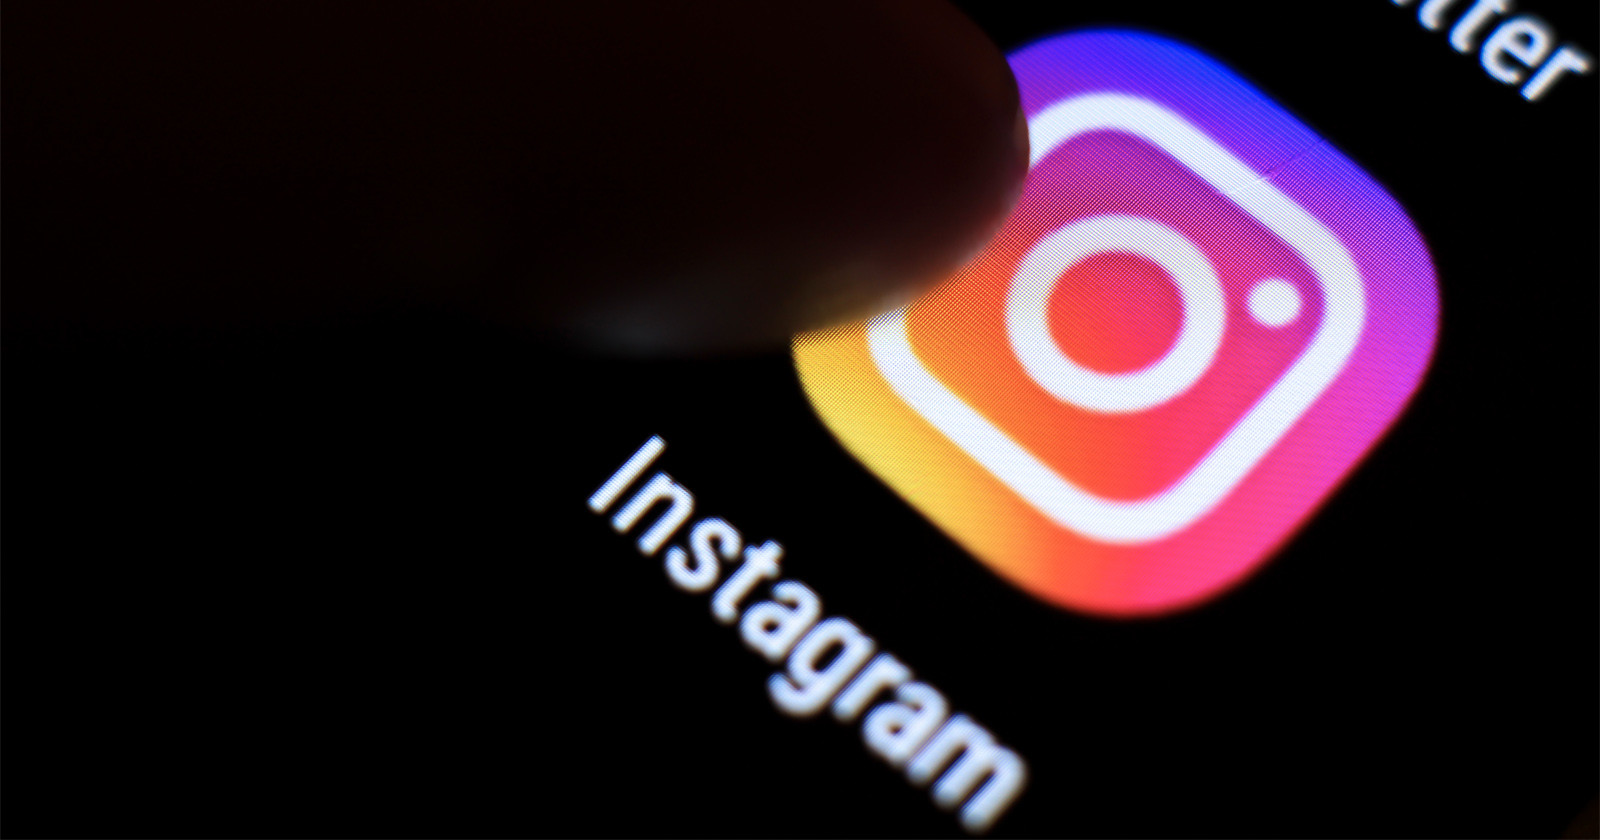 Instagrams Algorithm Promotes and Connects Vast Network of Pedophiles